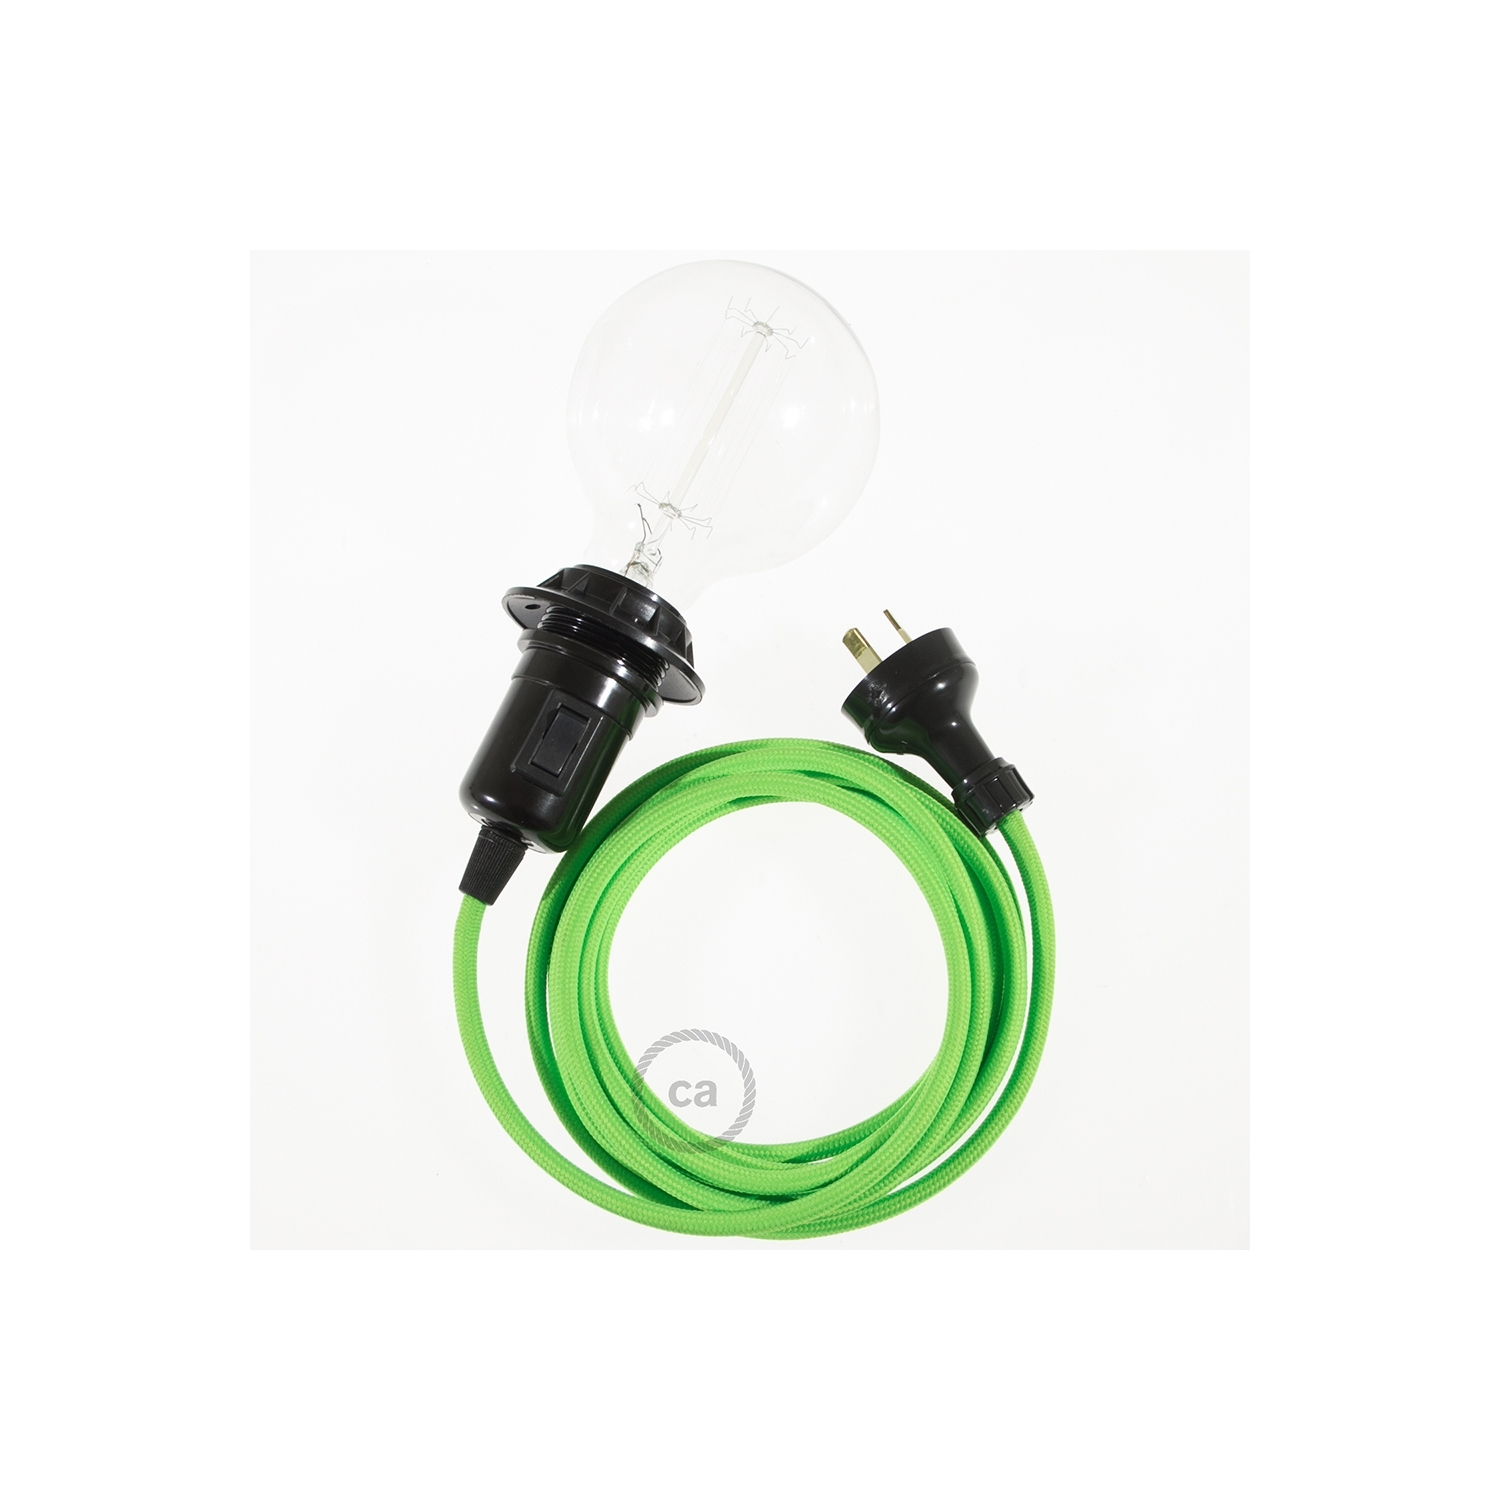 Create your RF06 Green Fluo Snake for lampshade and bring the light wherever you want.